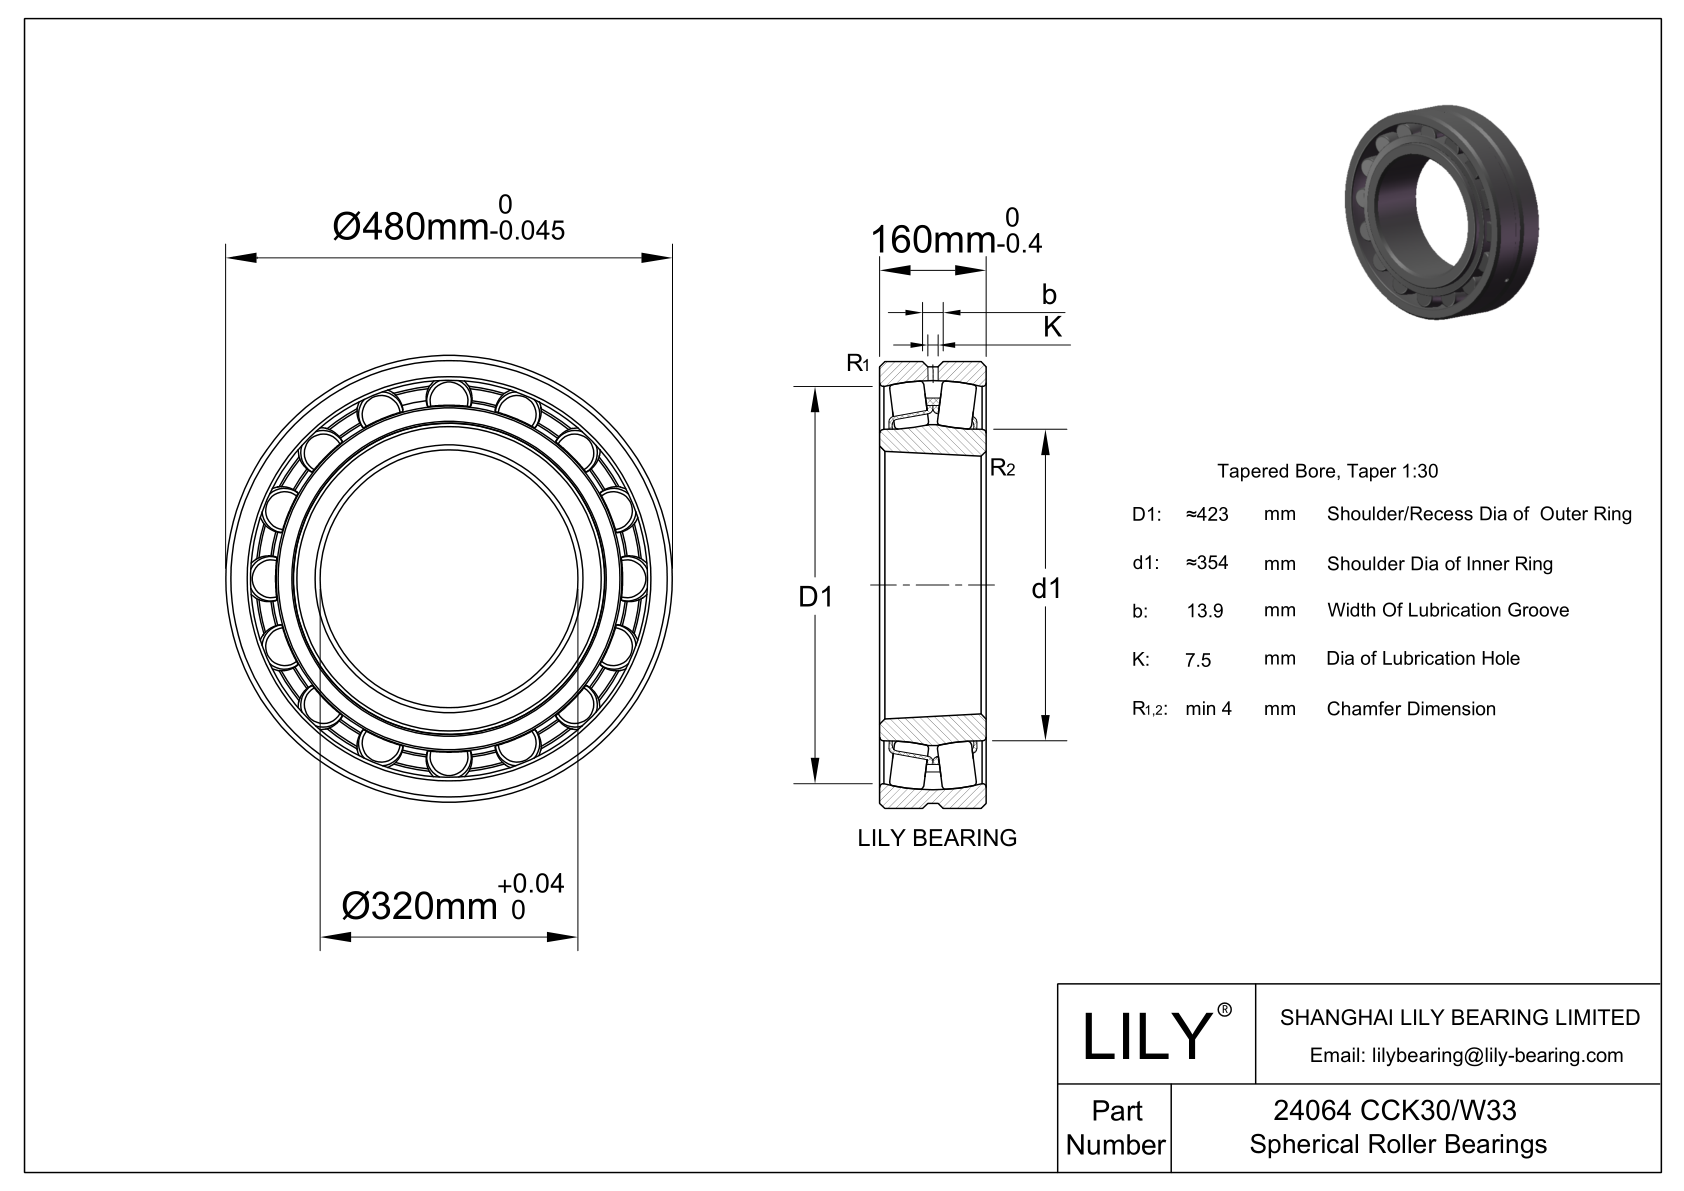 24064 CCK30/W33 Double Row Spherical Roller Bearing cad drawing